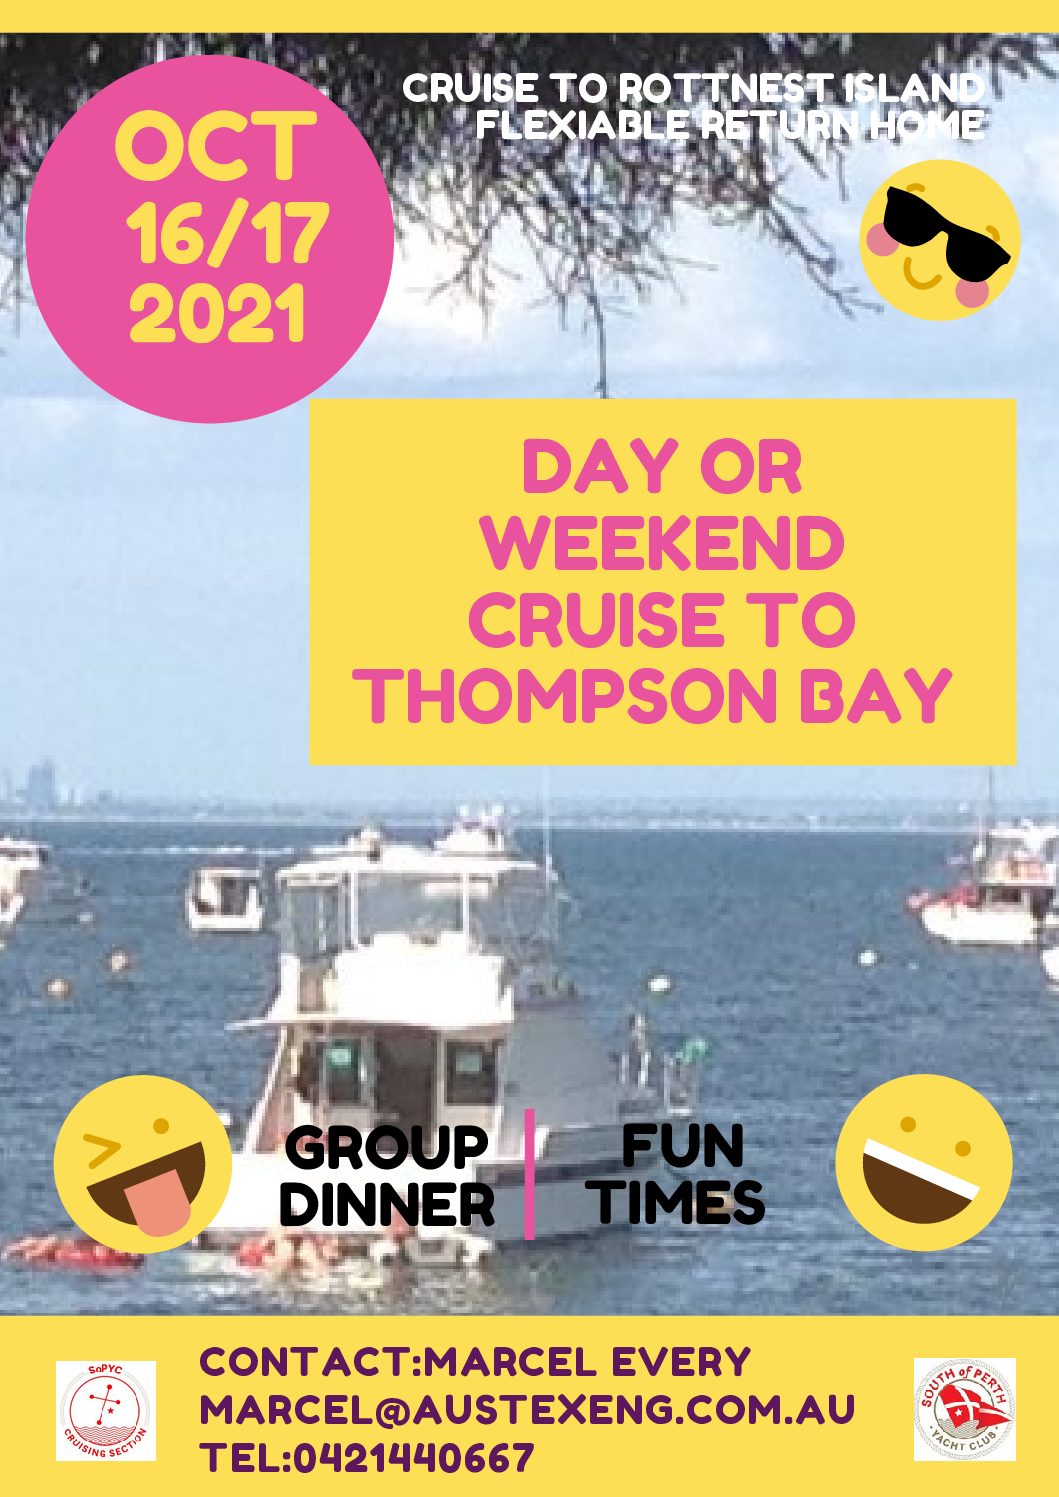 Day or Weekend Cruise to Thompson Bay